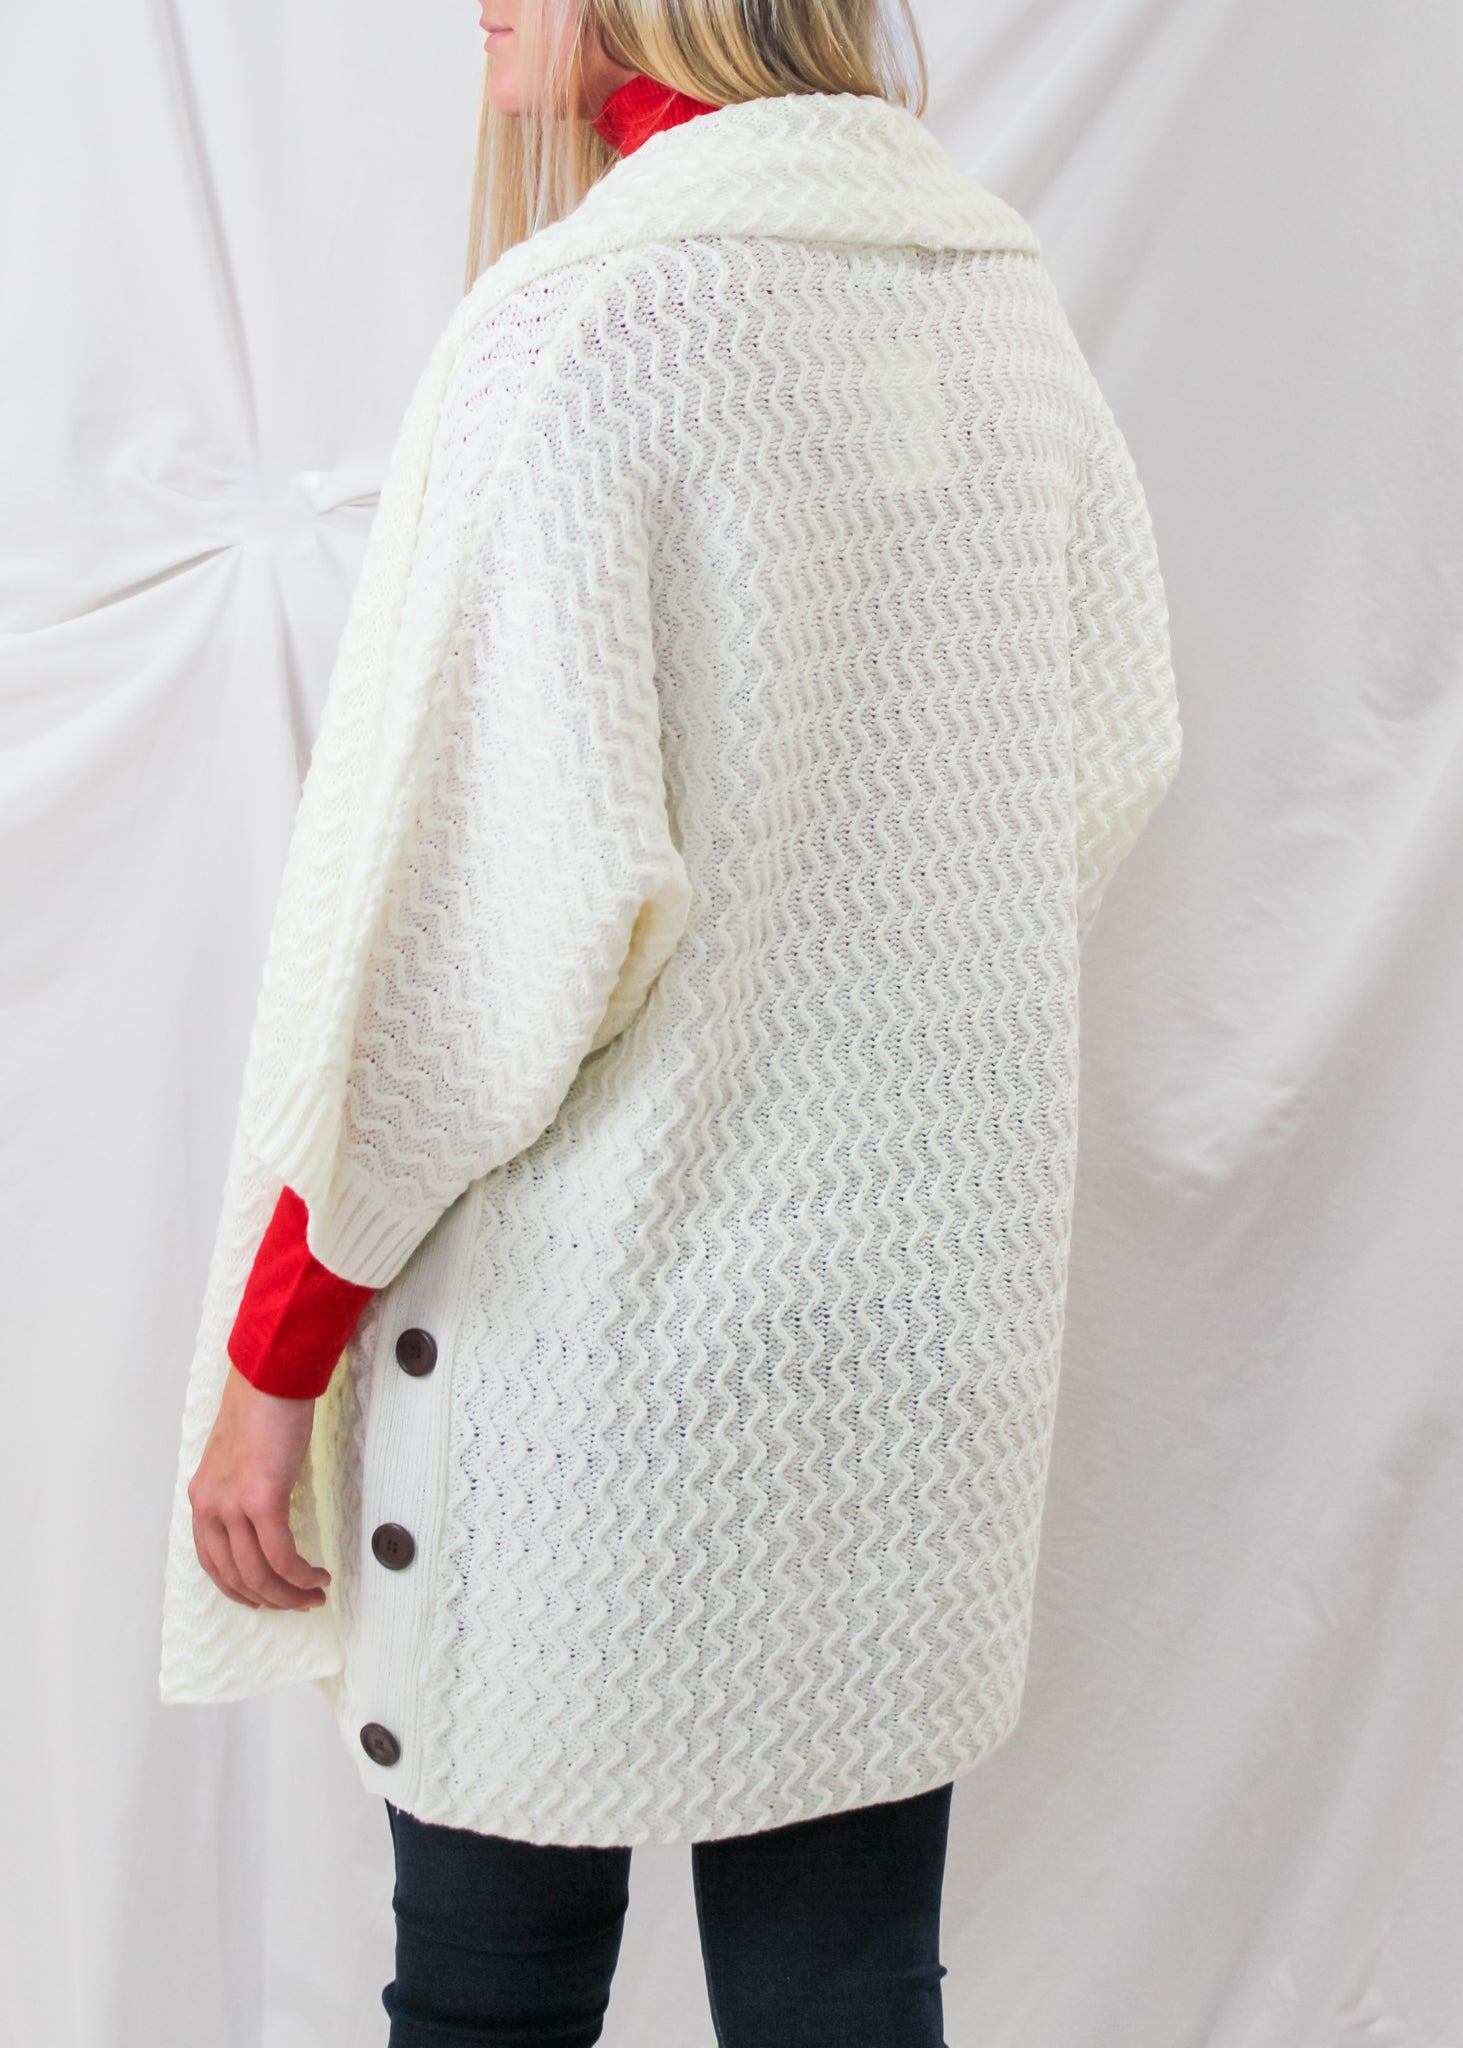 The Knit Cardigan in ivory from the back.